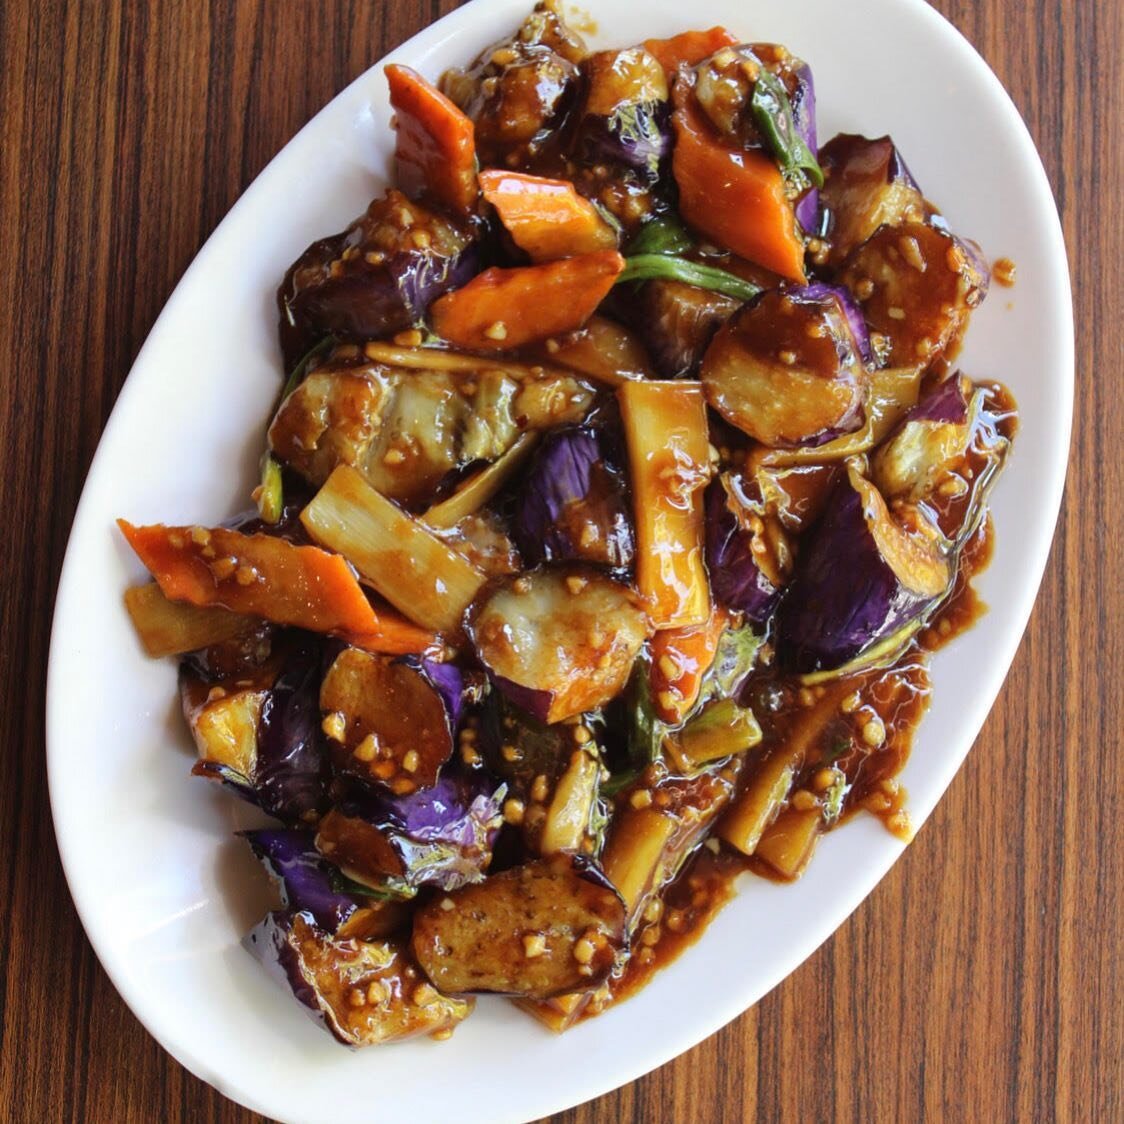 You gotta nourish to flourish so why don&rsquo;t you make your lunch time a little &ldquo;me time&rdquo; with your House Of Lu fave! #mariettasquare #houseoflumarietta #chineseeggplant #garlicsauce